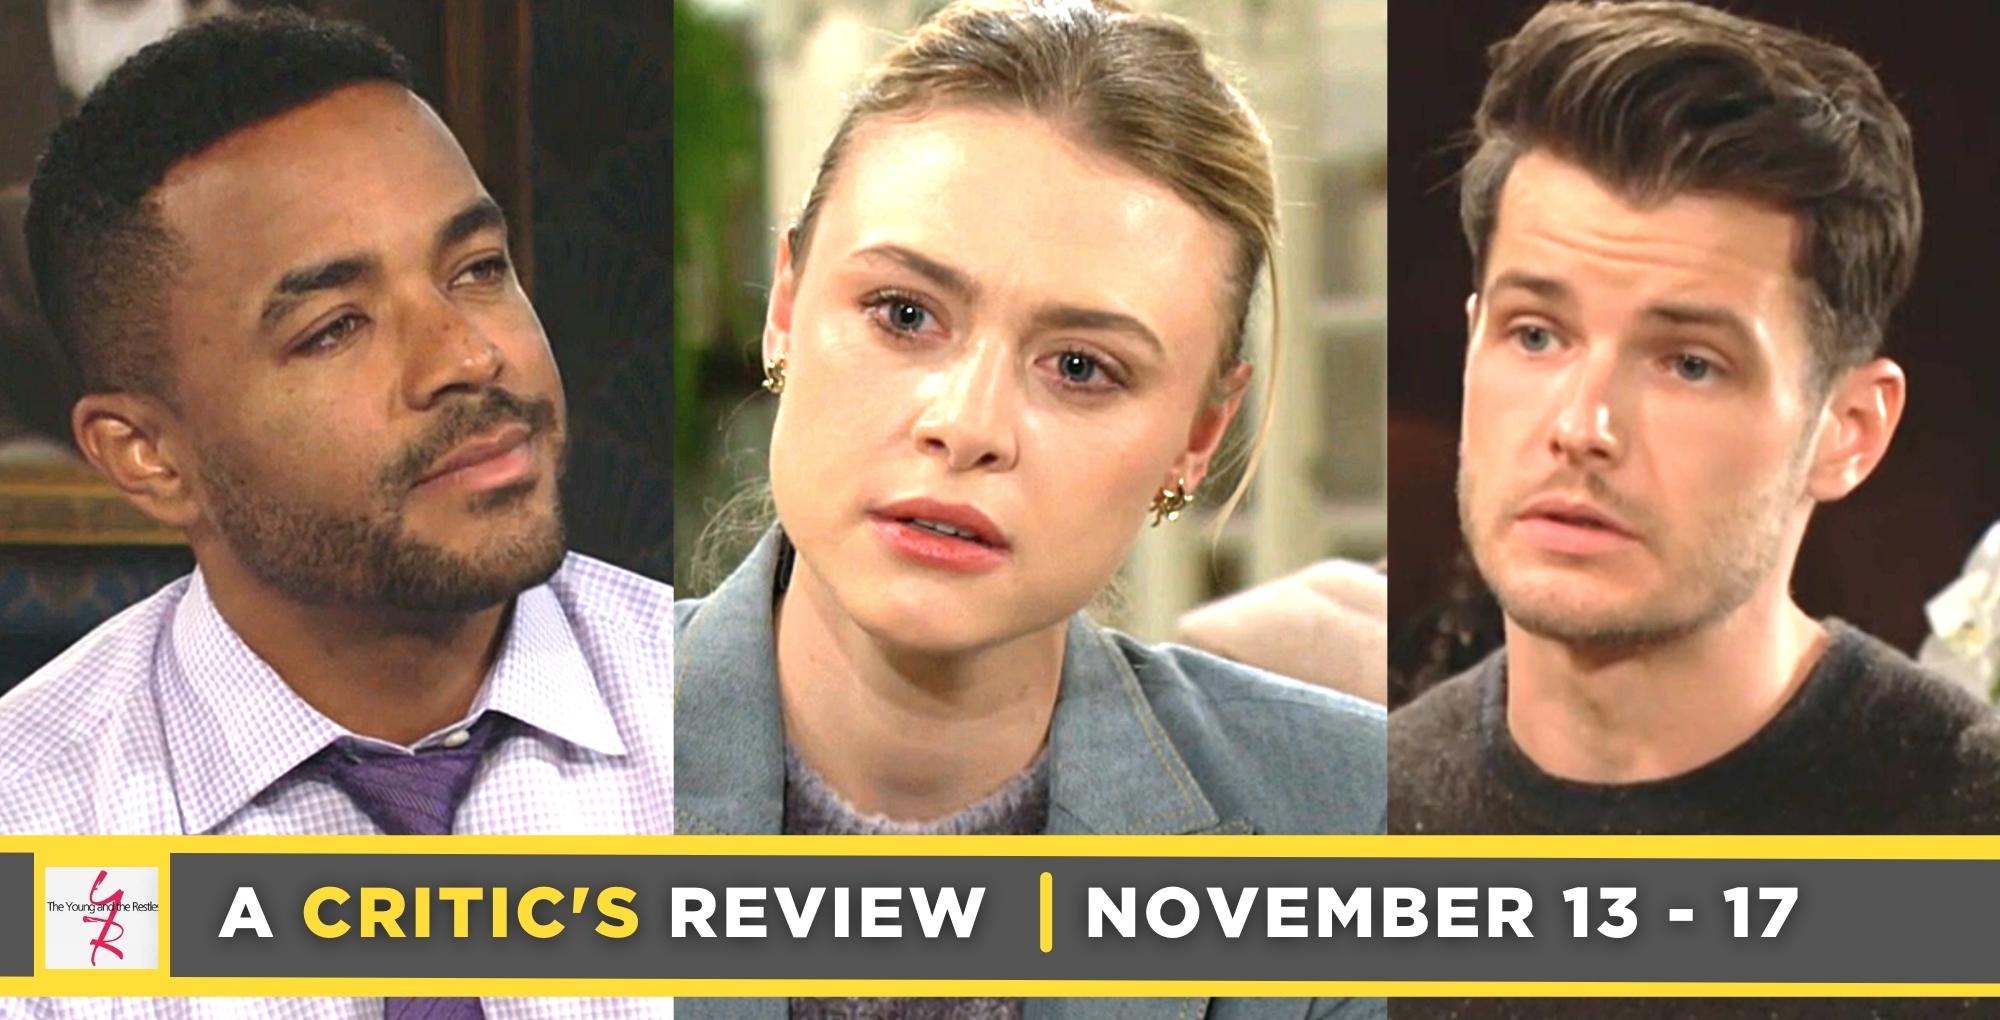 the young and the restless critic's review for november 13 – november 17, 2023. three images, nate, claire grace, kyle.